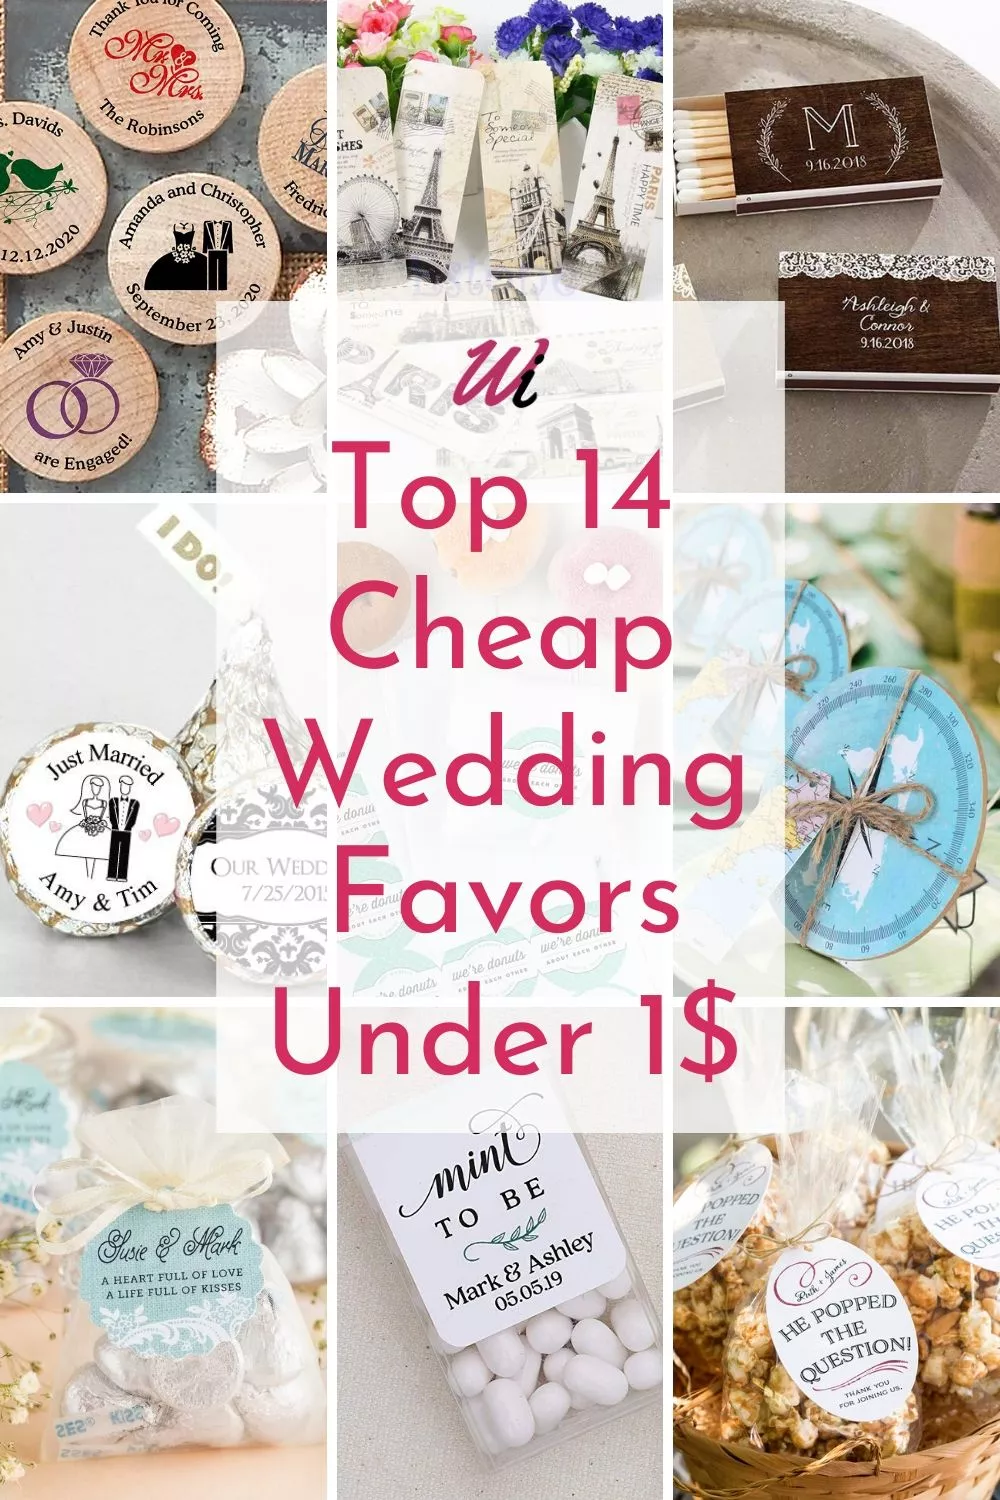 Wedding favors under $1 are available in just about any category or theme. Favors most suited to the wedding are the ones that reflect your style